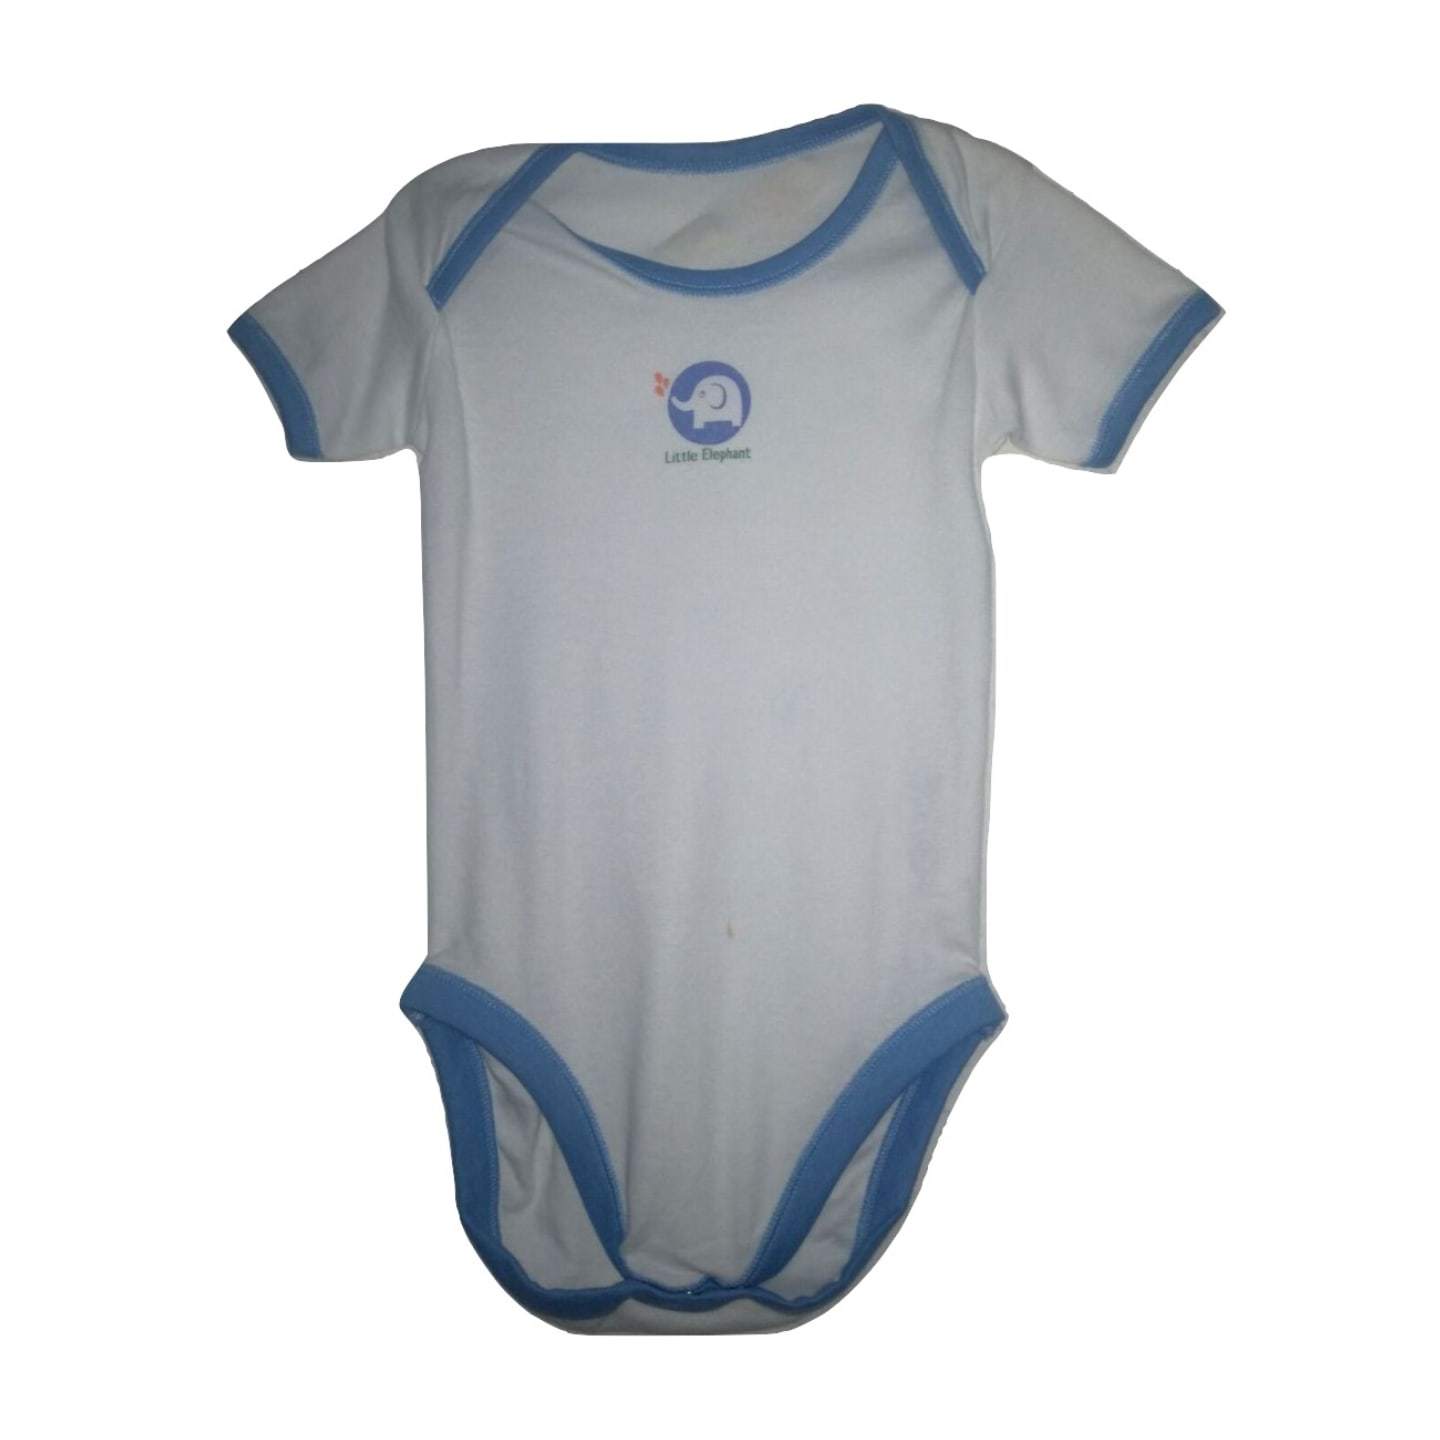 Little Elephant Design Bodysuit - White with Blue Details - Stockpoint Apparel Outlet